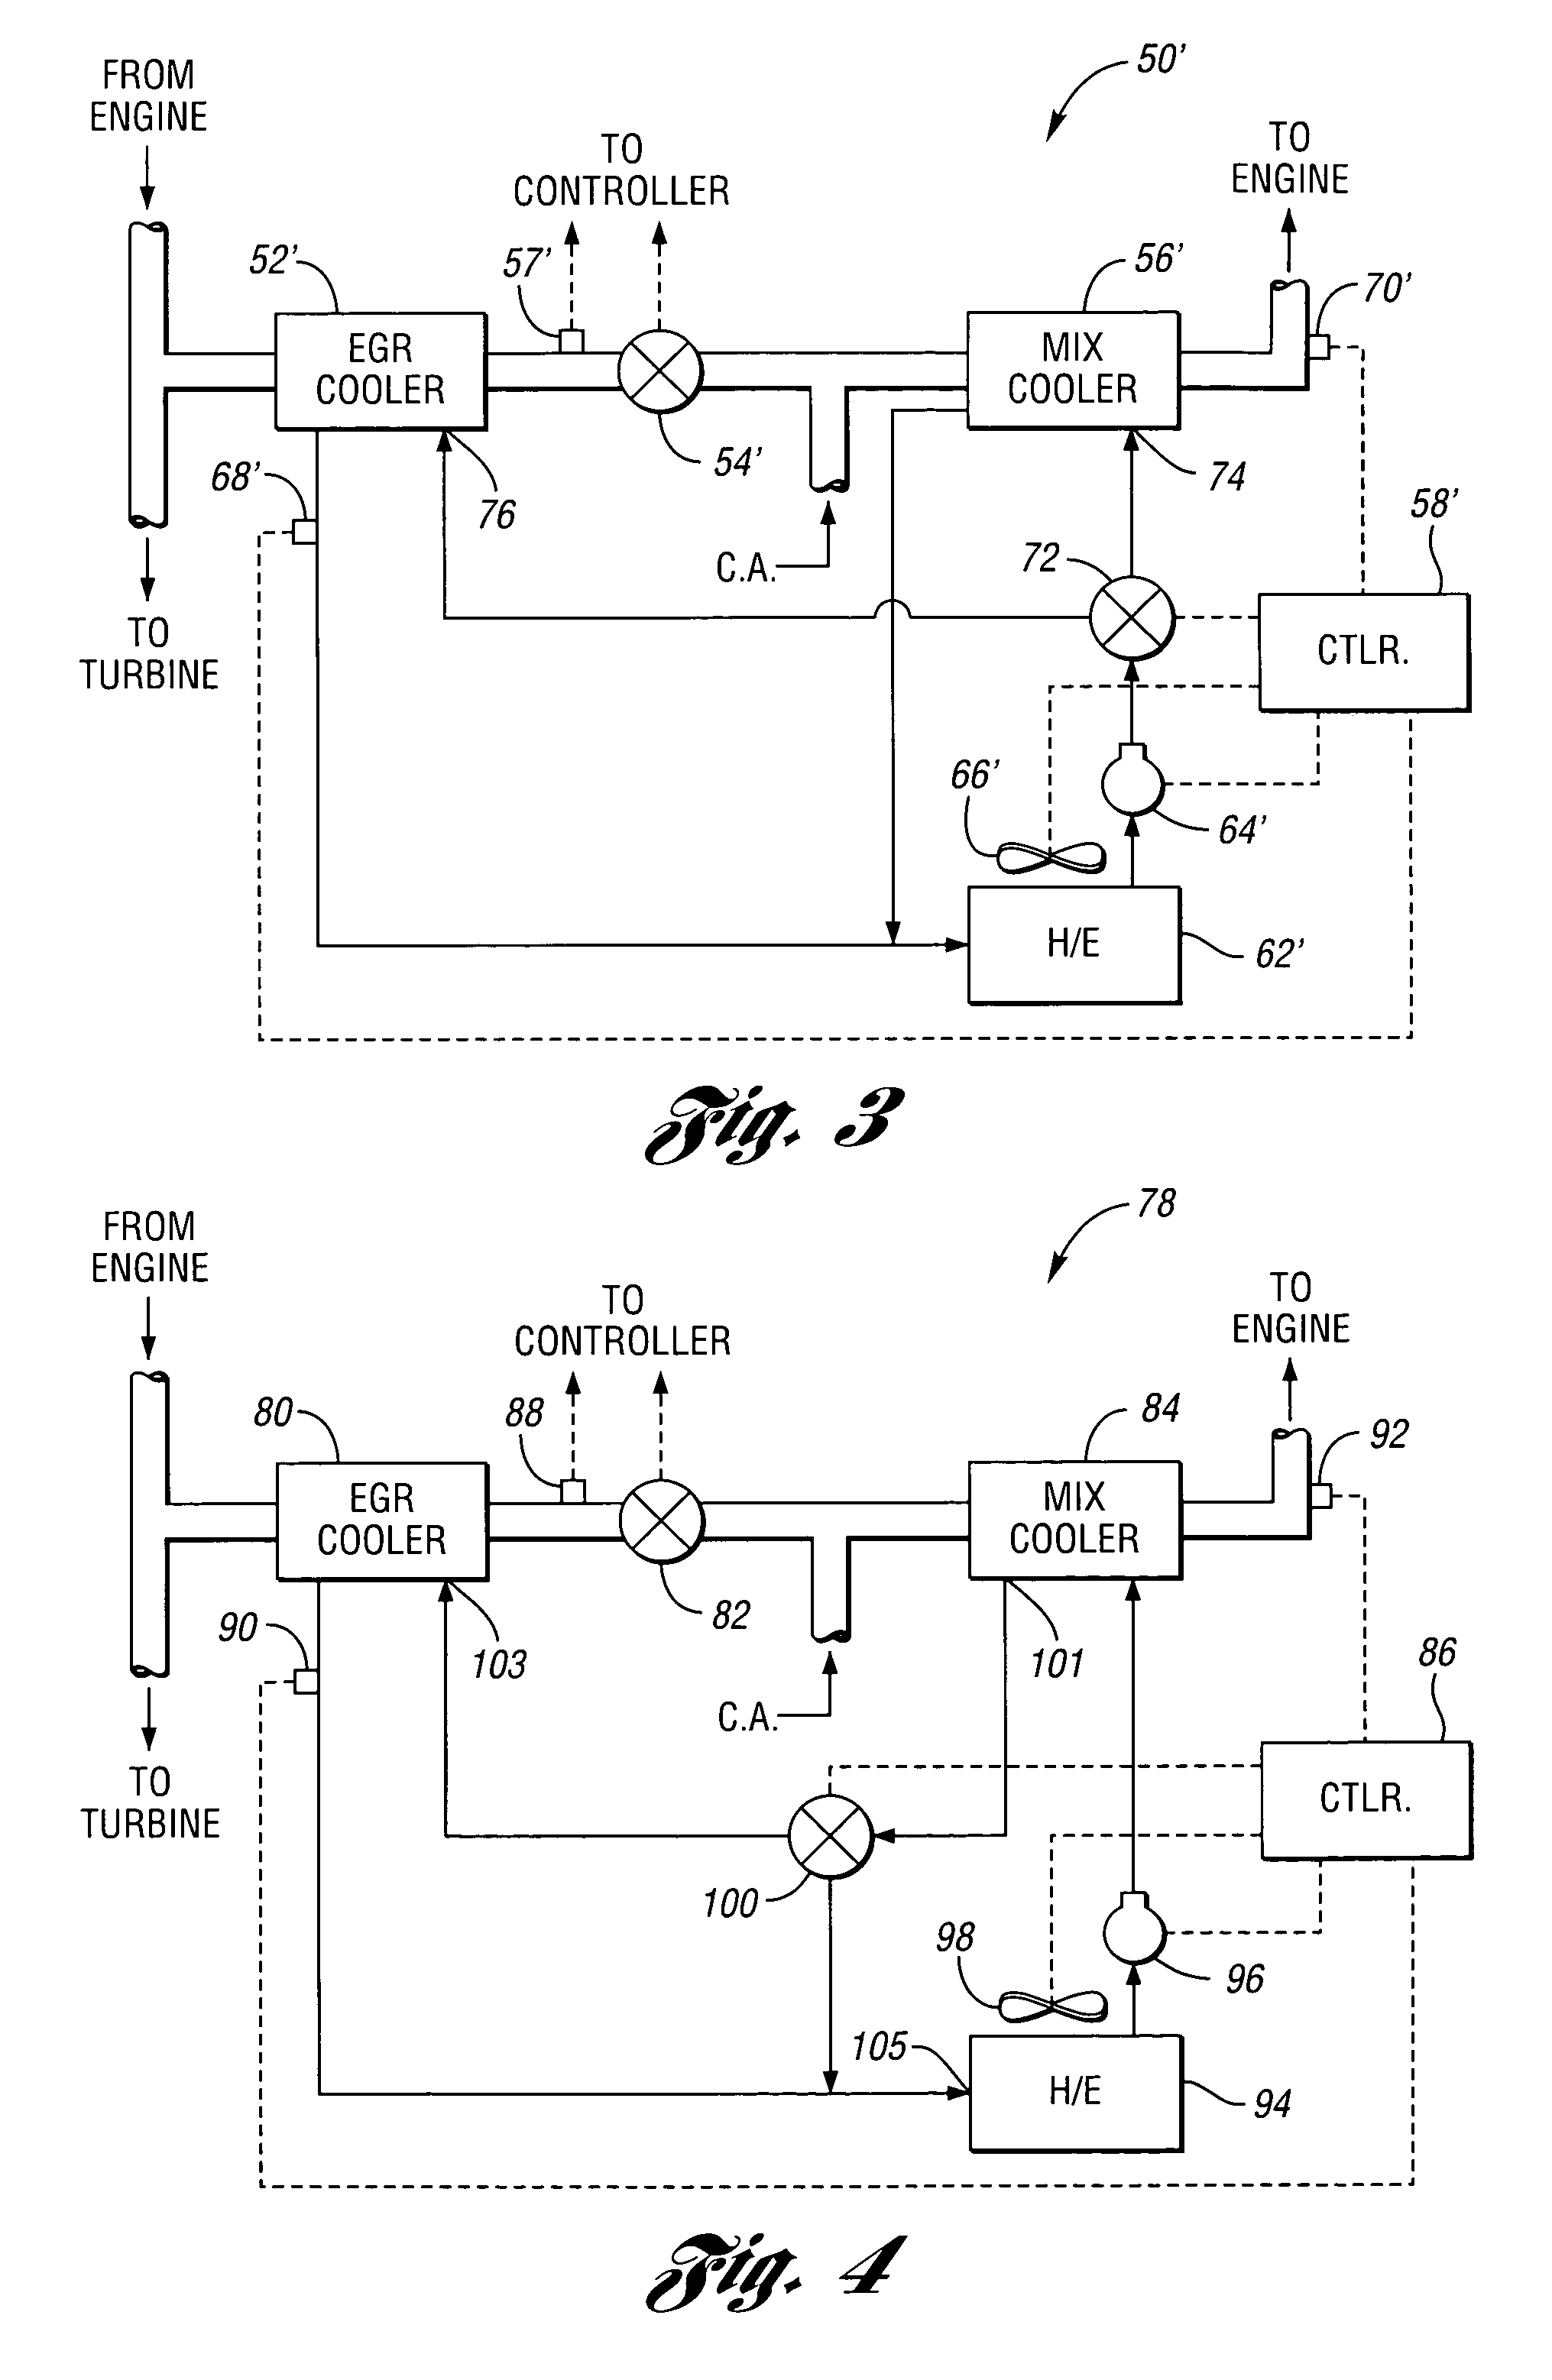 Thermal management system for a vehicle